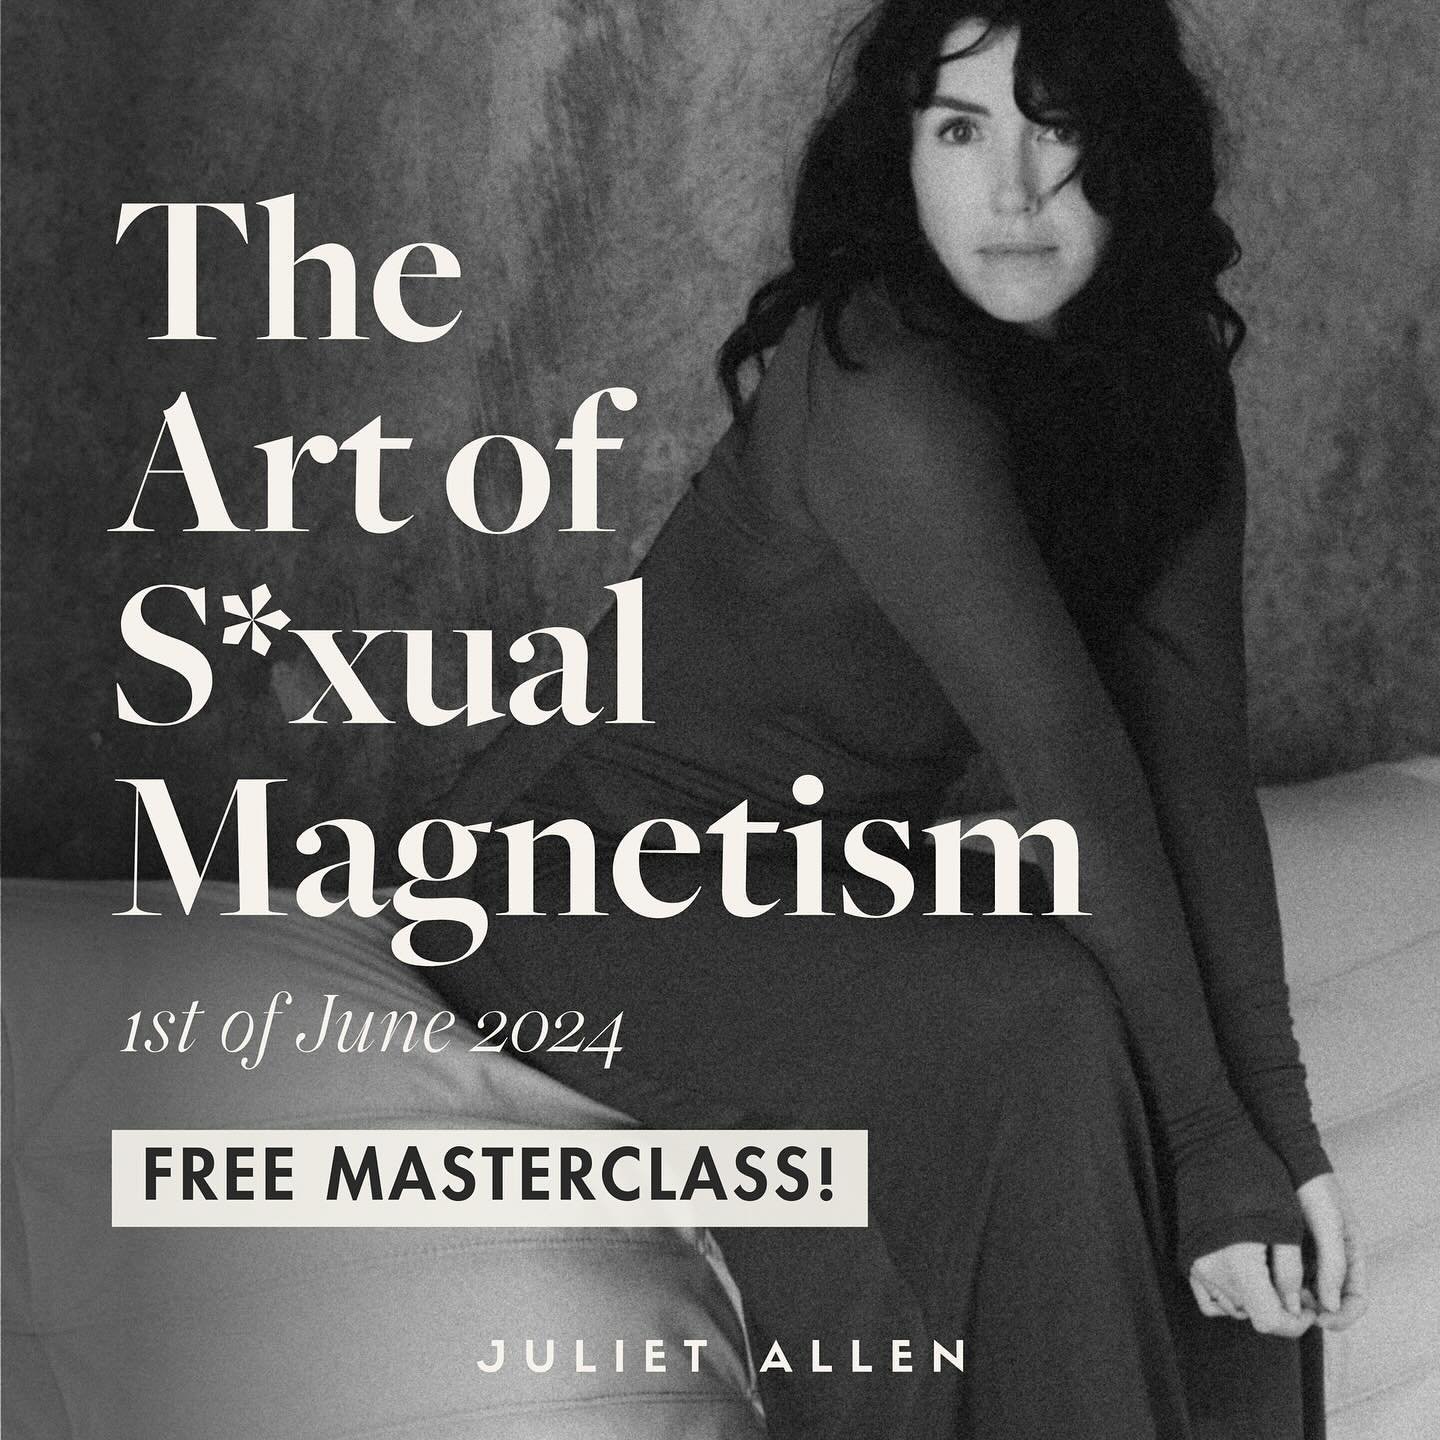 Ready to transform your life and unlock your full s^xual magnetism?🔥🧲

Join me for an exclusive free masterclass on THE ART OF S^XUAL MAGNETISM ✨ Discover the 3 pillars, and learn what it takes to turn on your pleasure potential.

🗓️ Date: 1st Jun